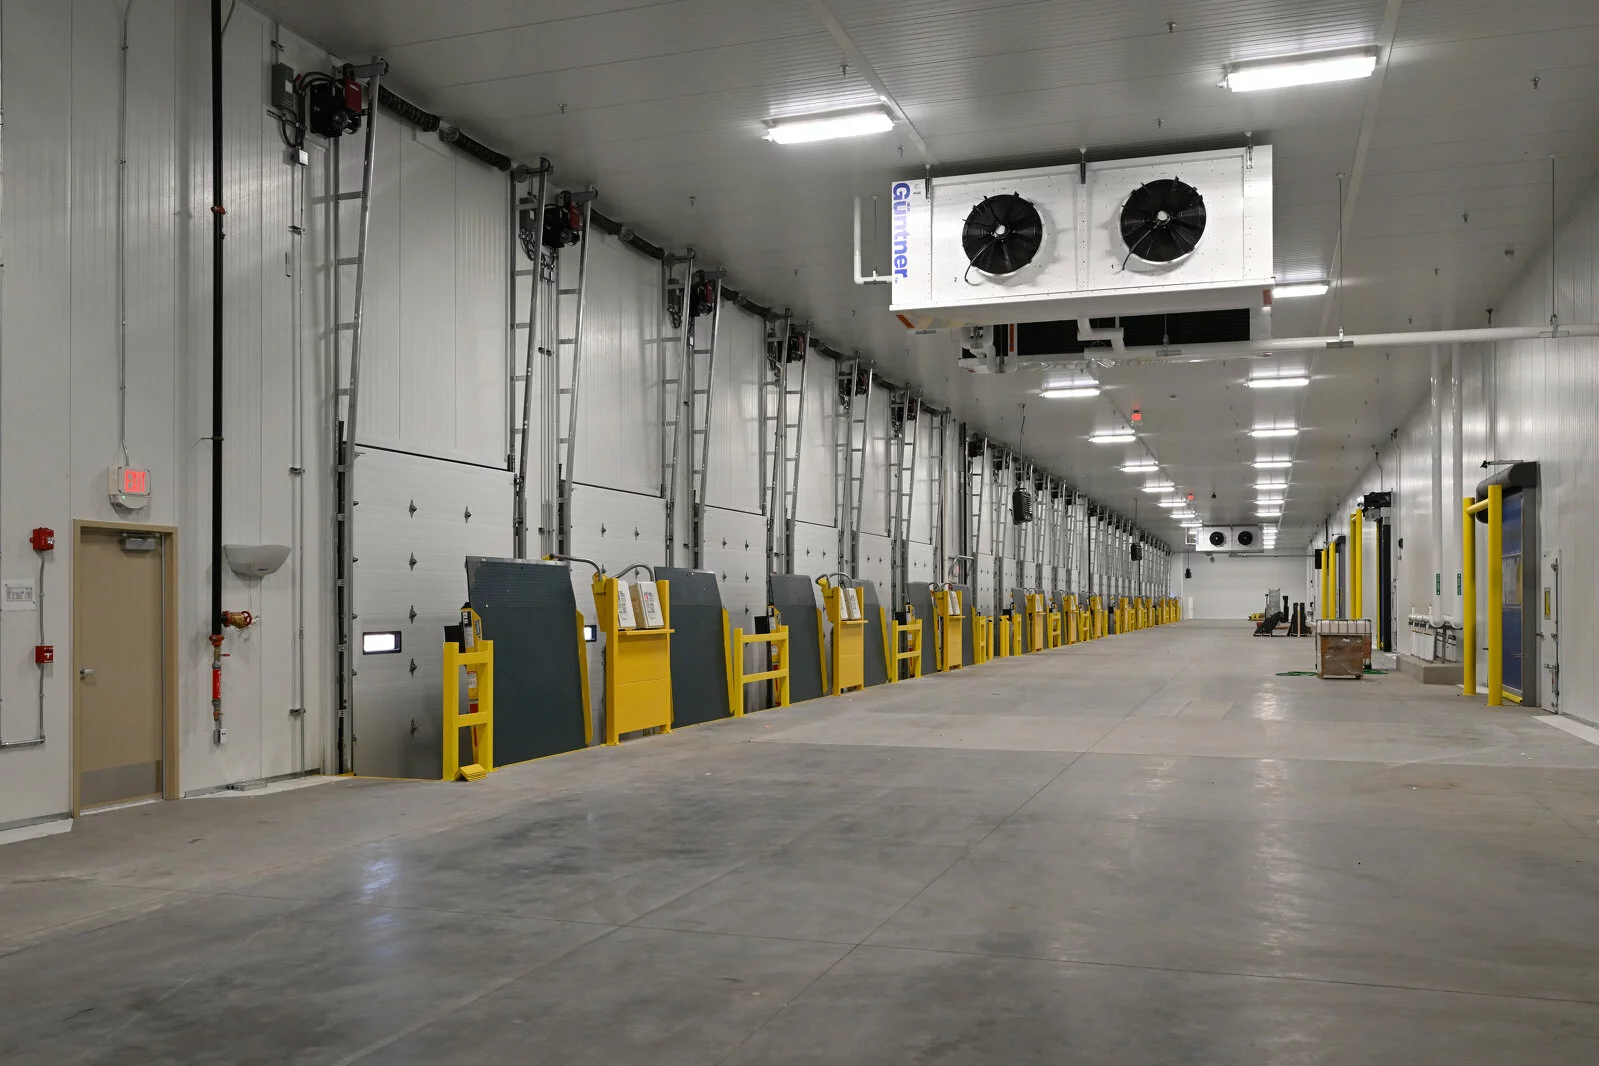 interior distribution warehouse, multiple rows of distribution bays, concrete floors.